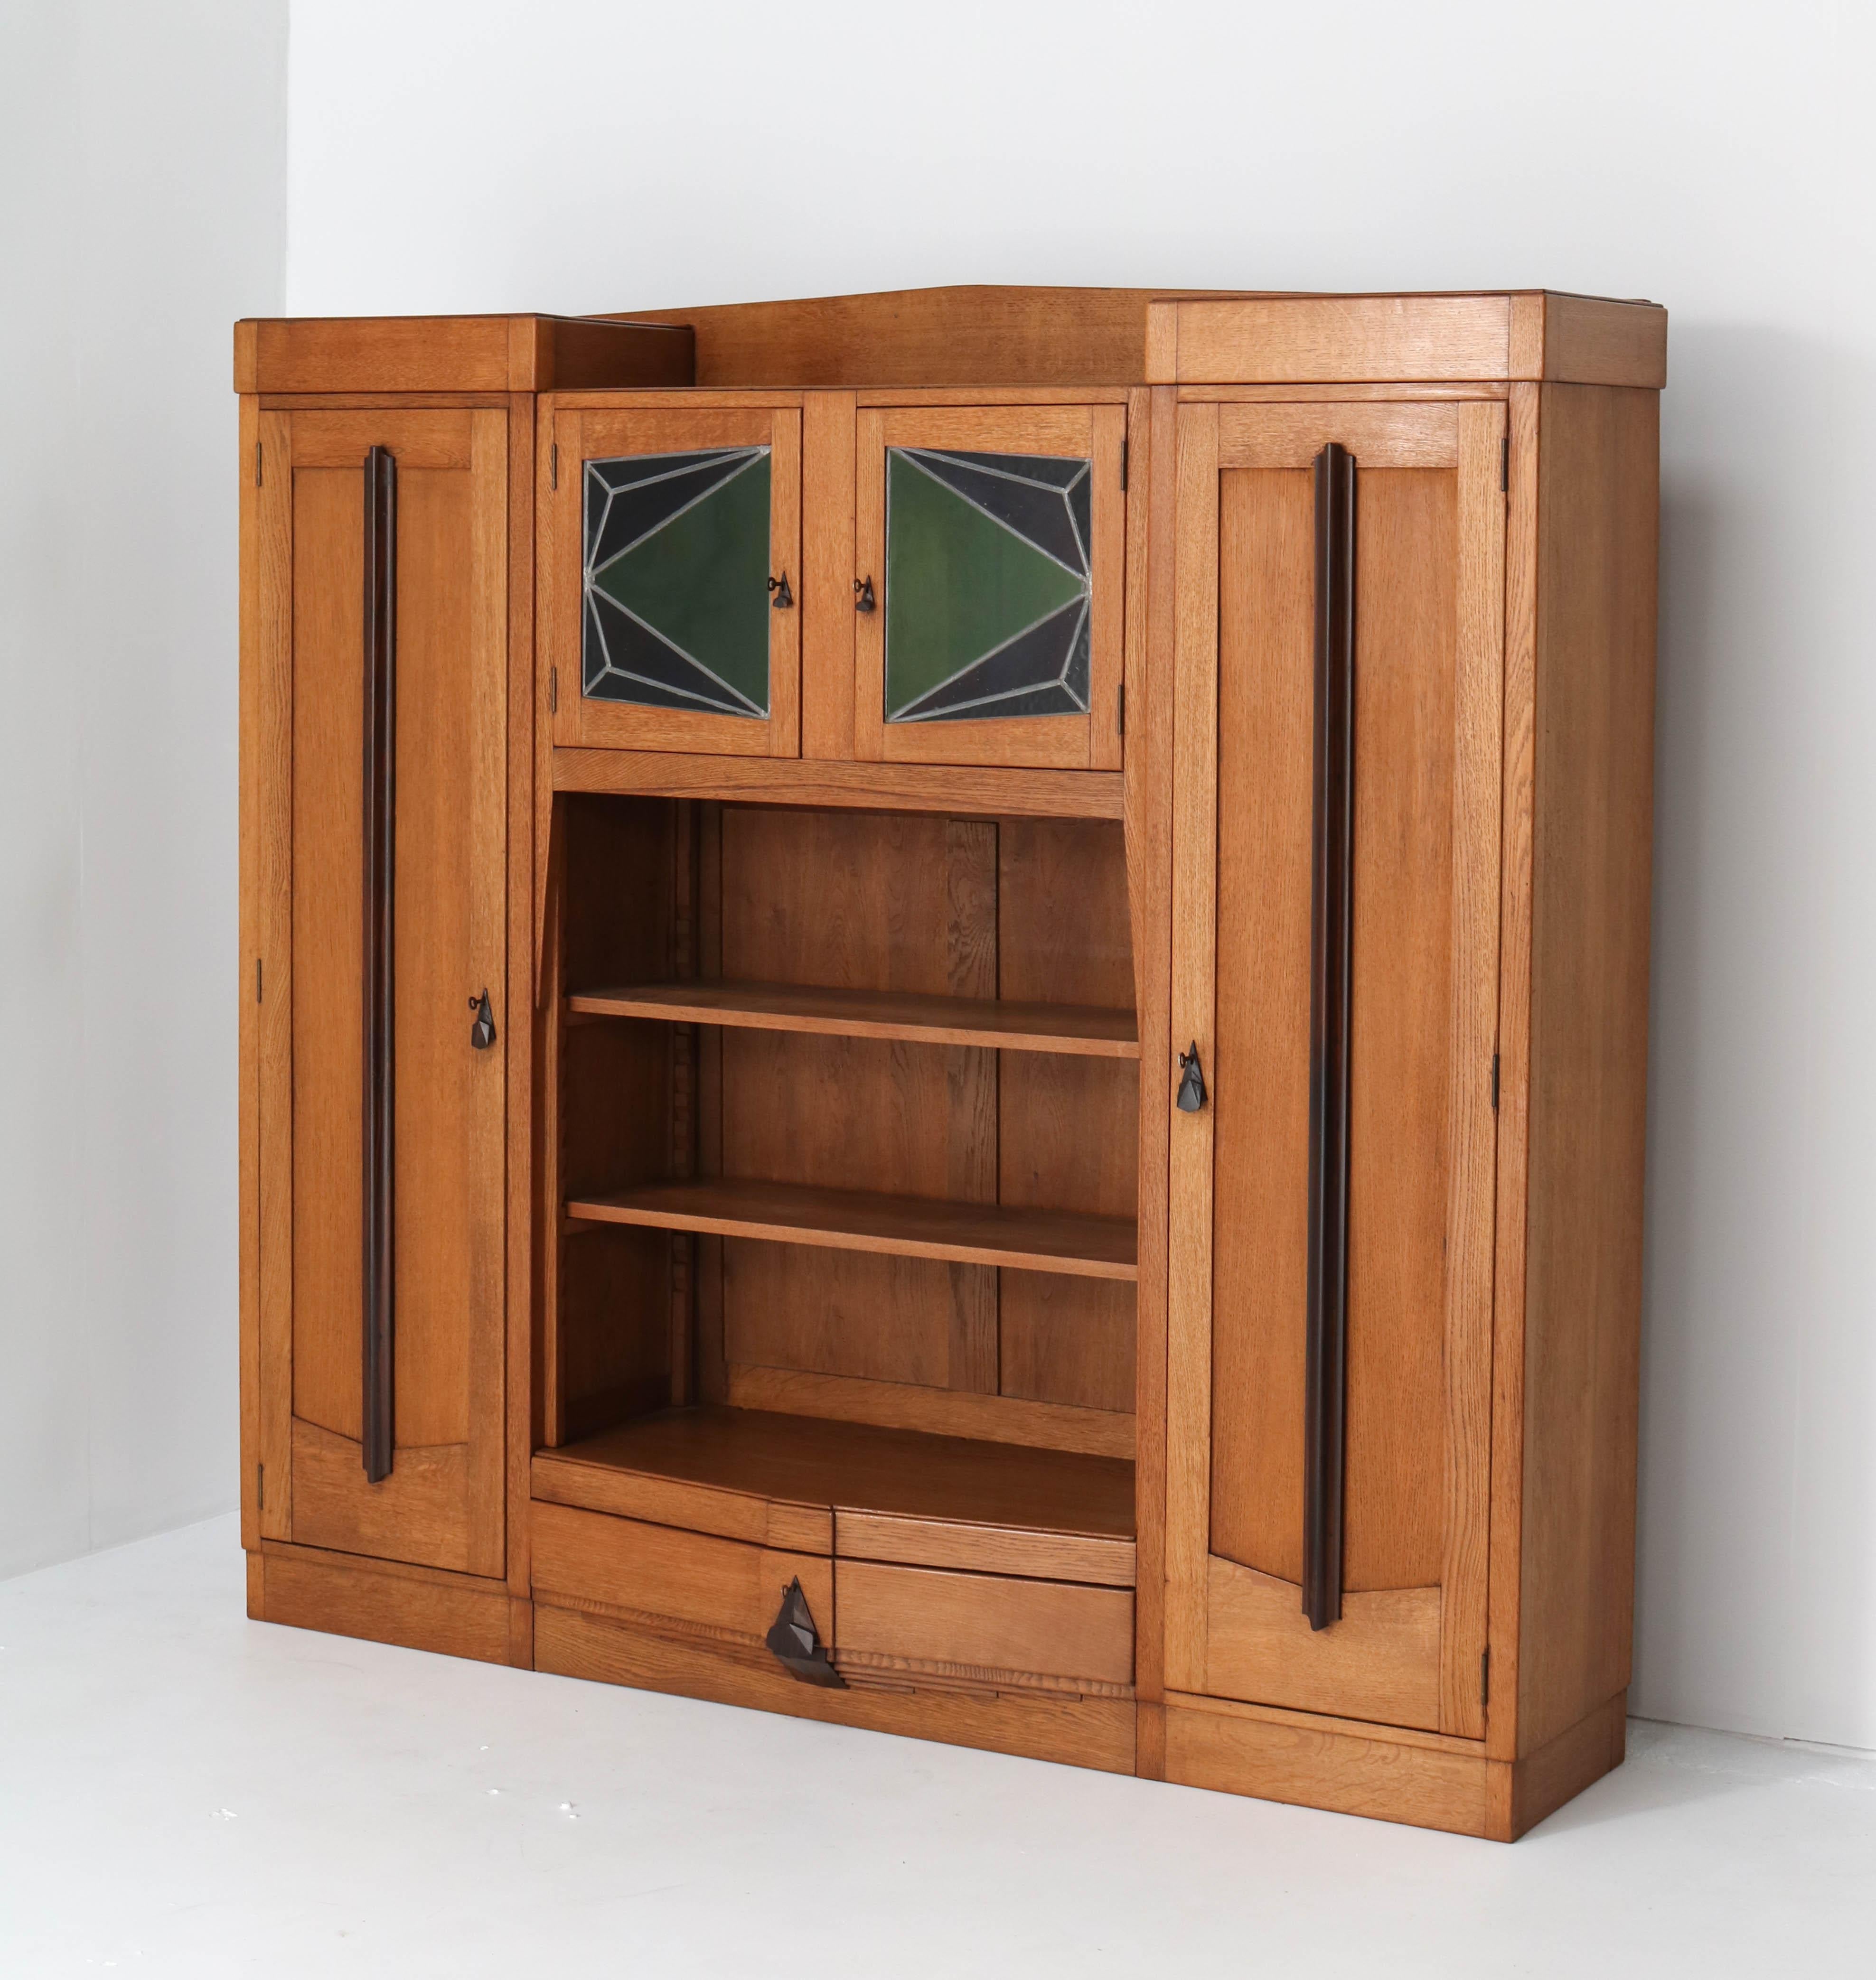 Dutch Oak Art Deco Amsterdam School Bookcase with Stained Glass, 1920s